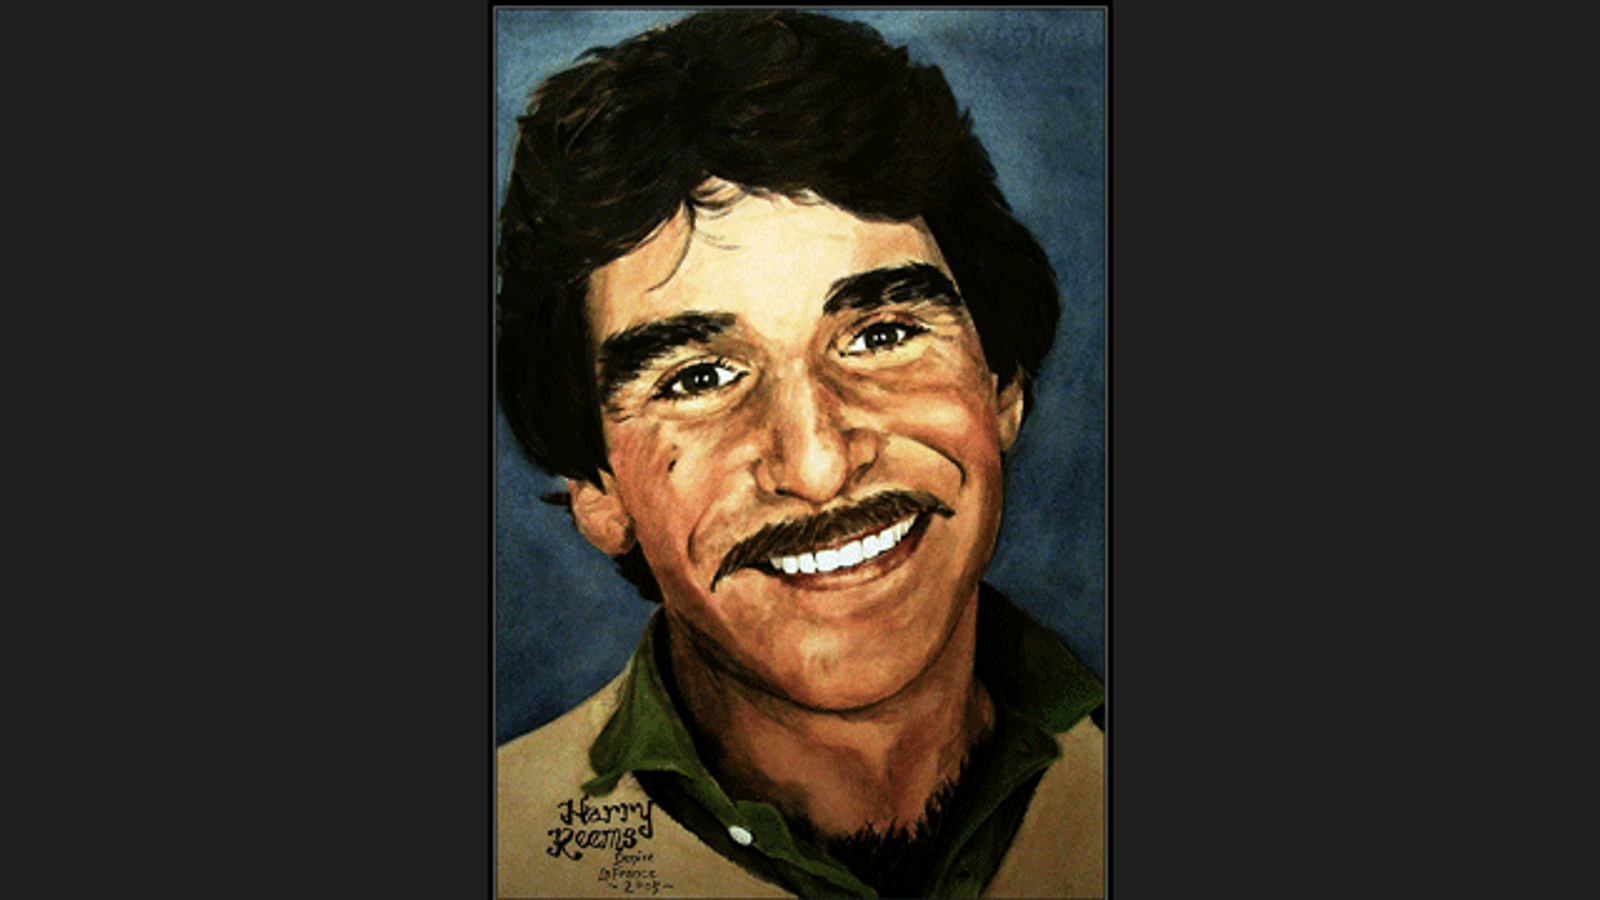 An Interview With Harry Reems